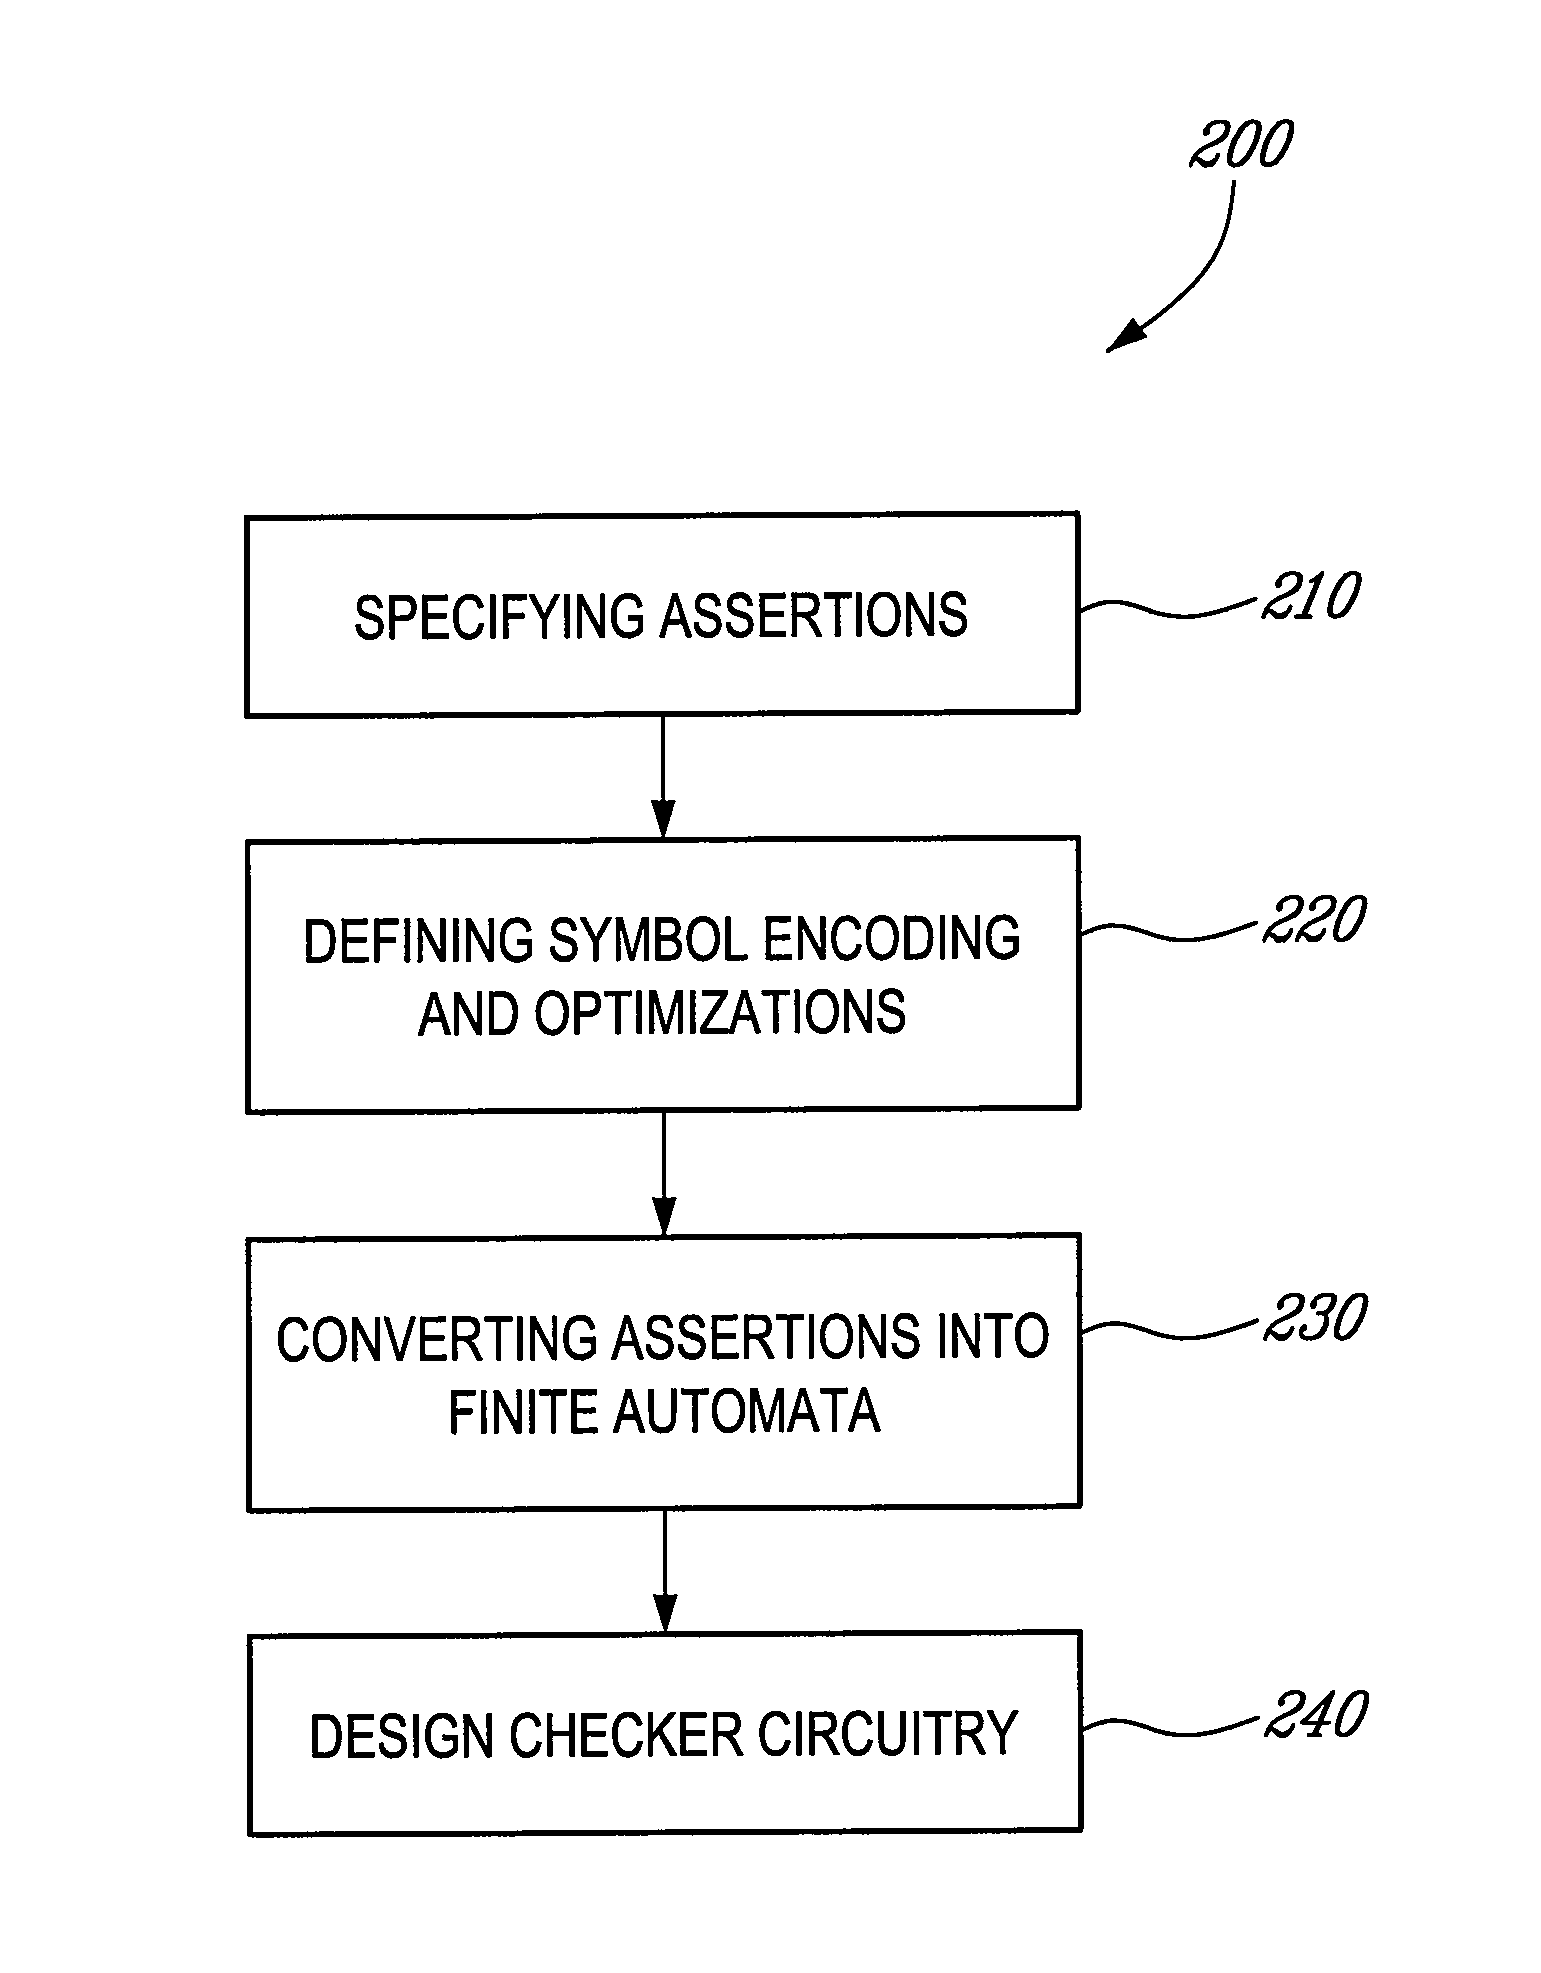 Automata unit, a tool for designing checker circuitry and a method of manufacturing hardware circuitry incorporating checker circuitry